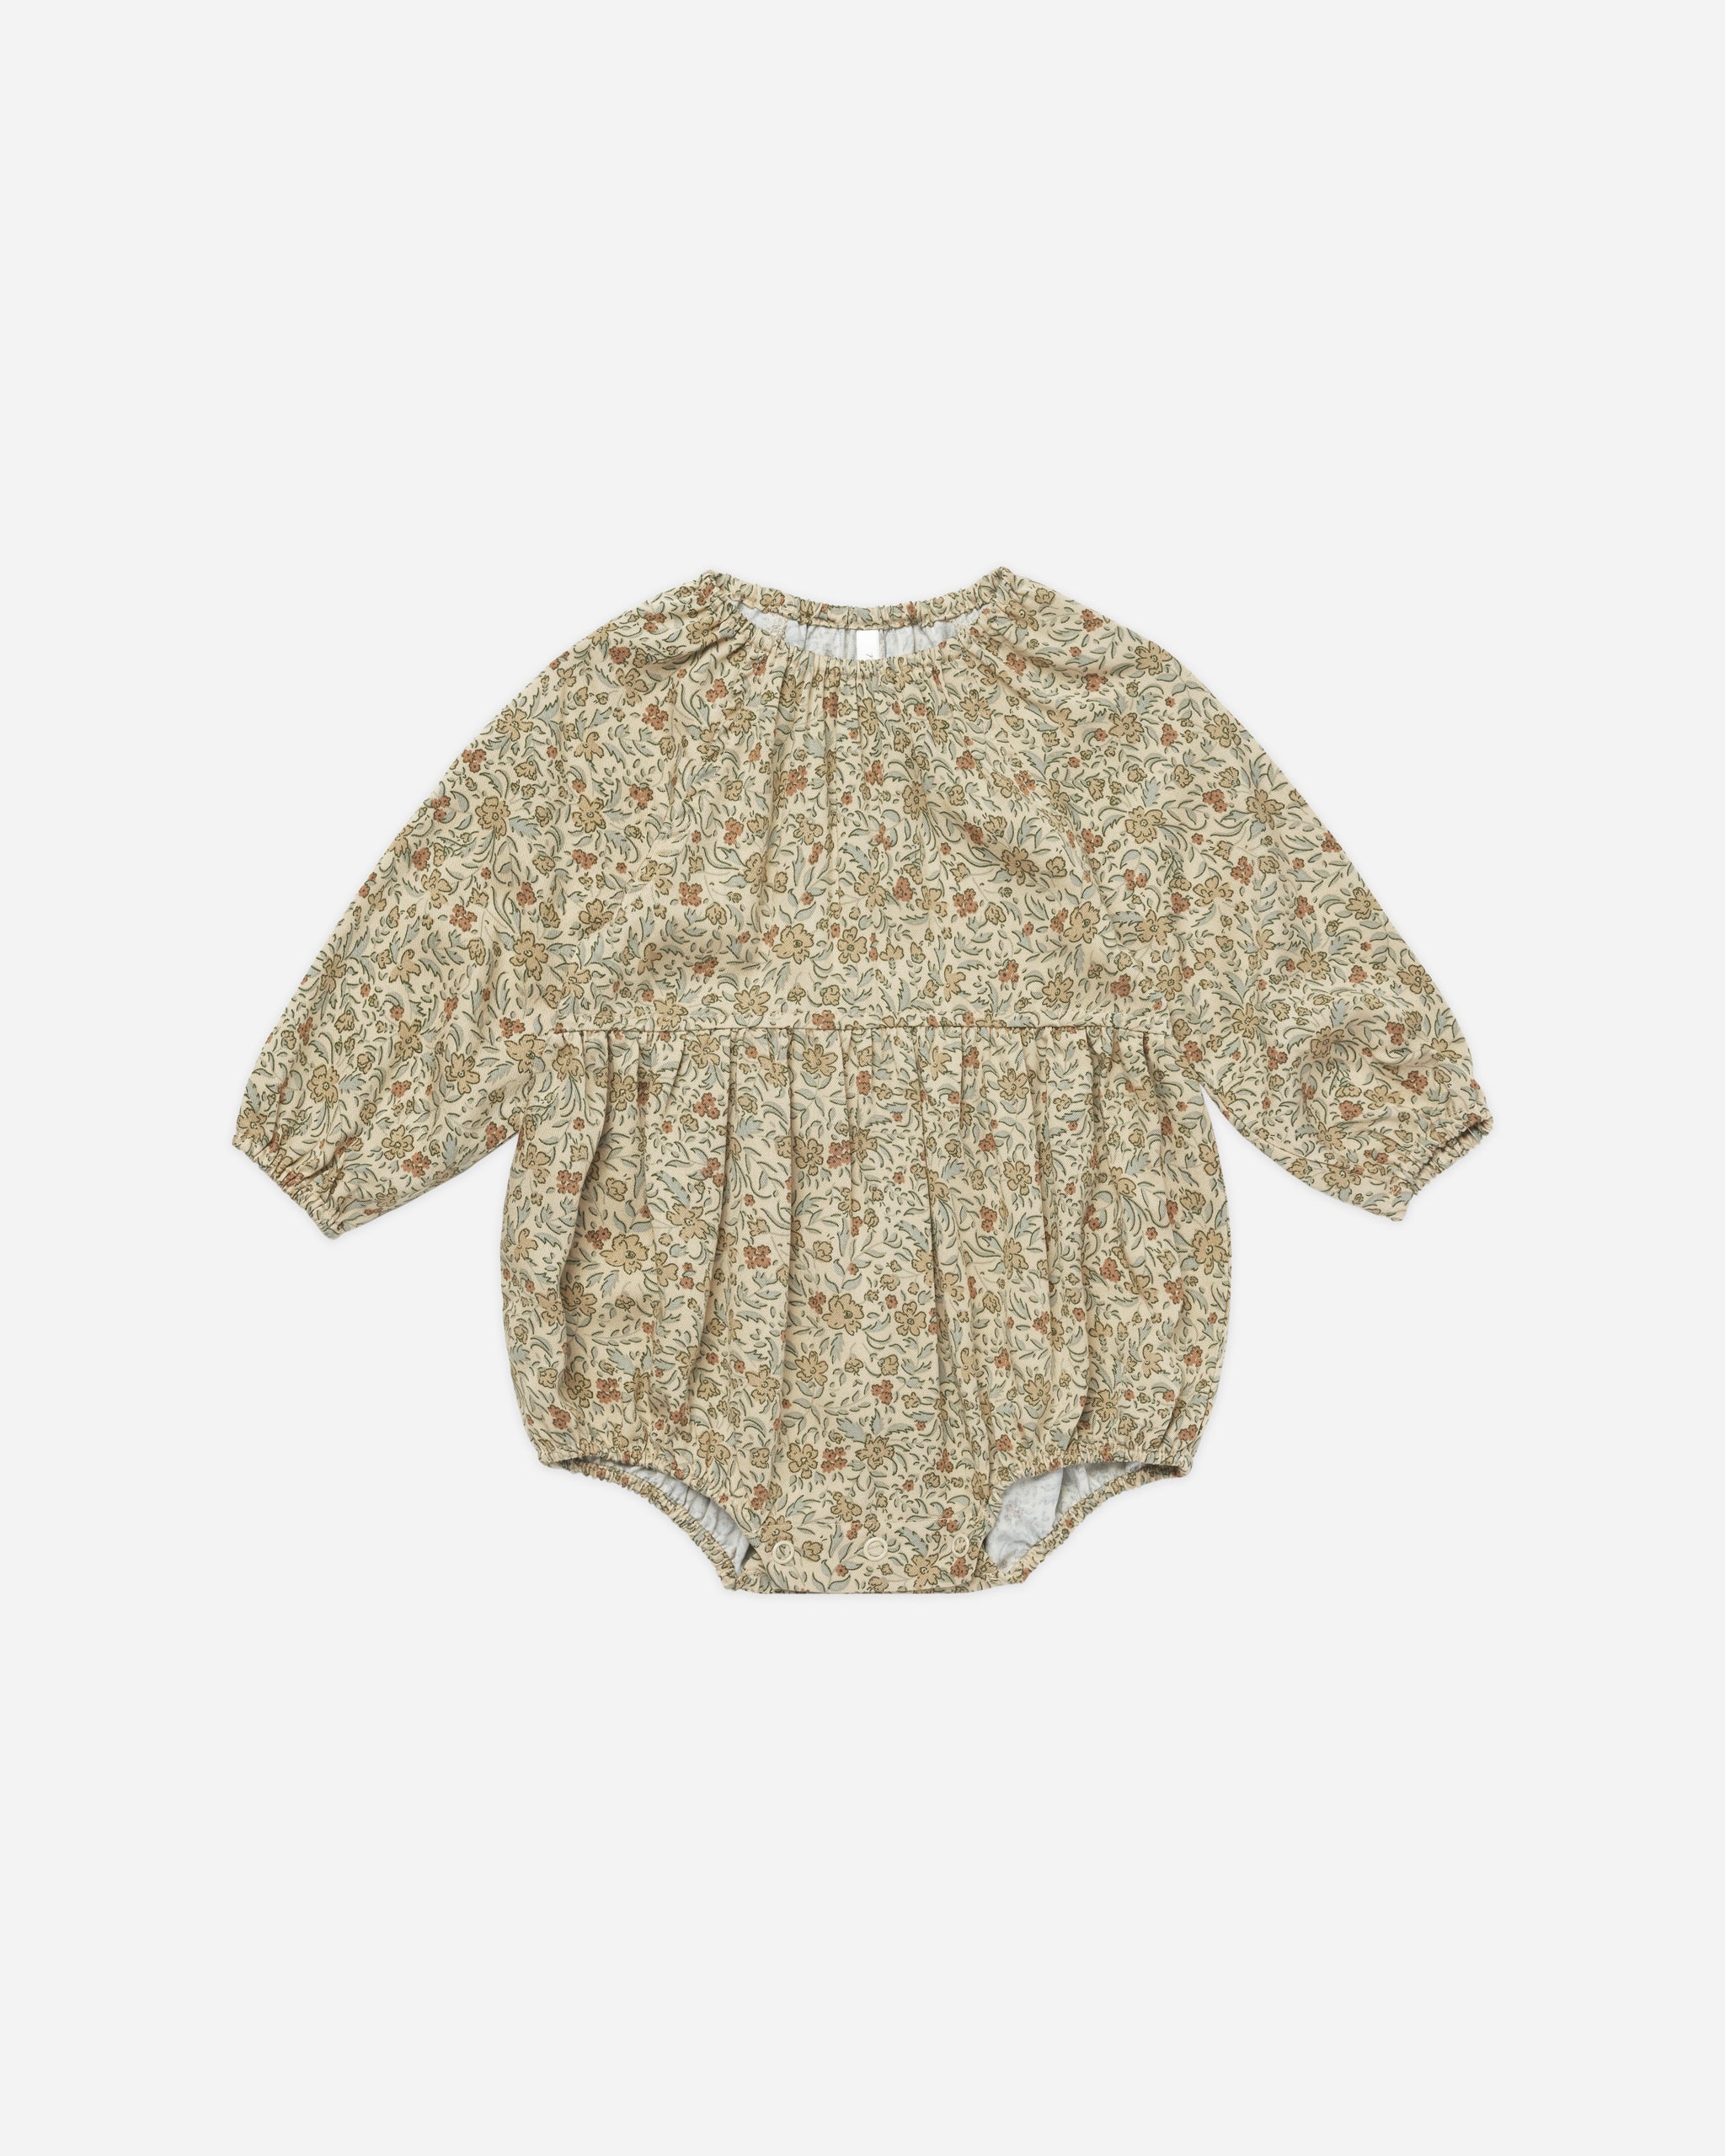 Long Sleeve Bubble Romper || Golden Garden - Rylee + Cru | Kids Clothes | Trendy Baby Clothes | Modern Infant Outfits |